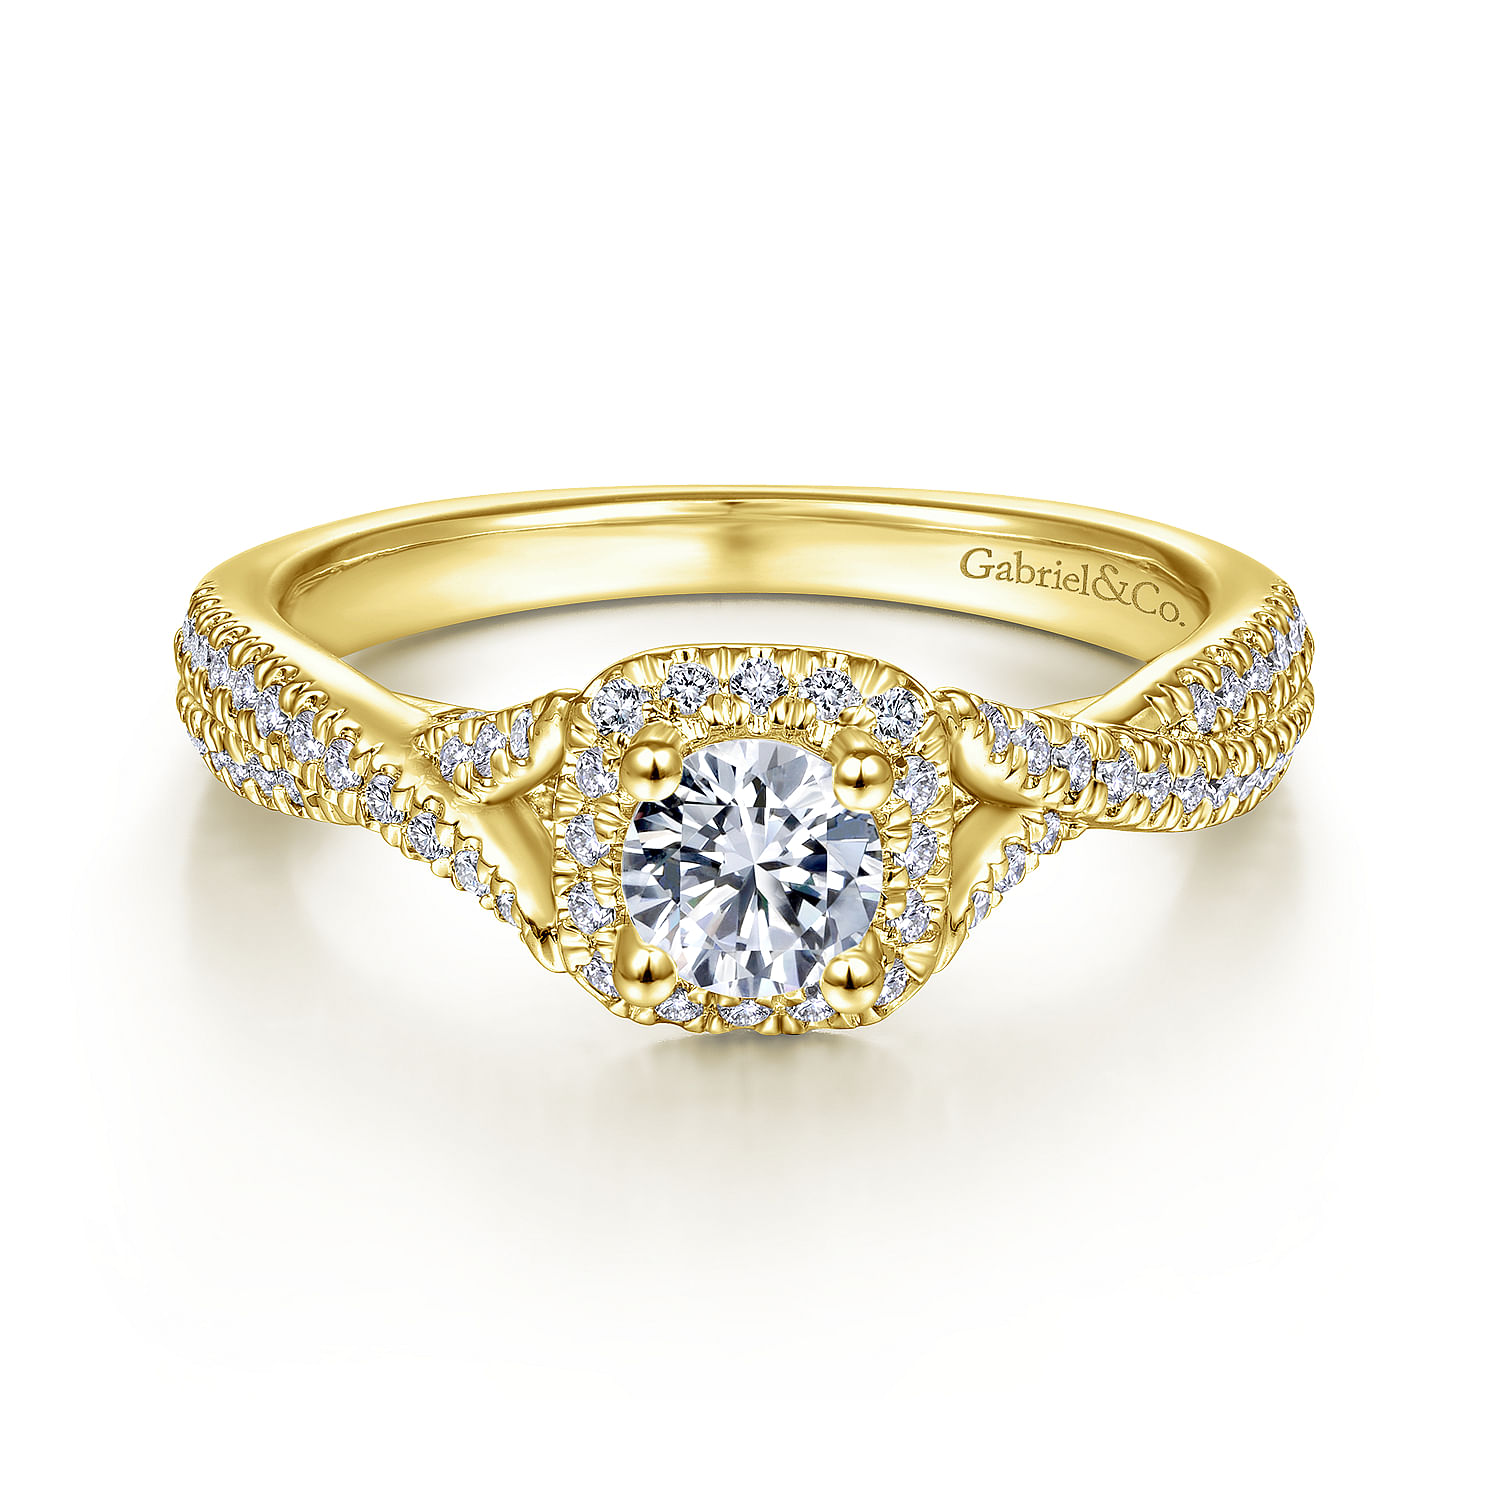 Nahla - 14K Yellow Gold Round Halo Complete Diamond Engagement Ring